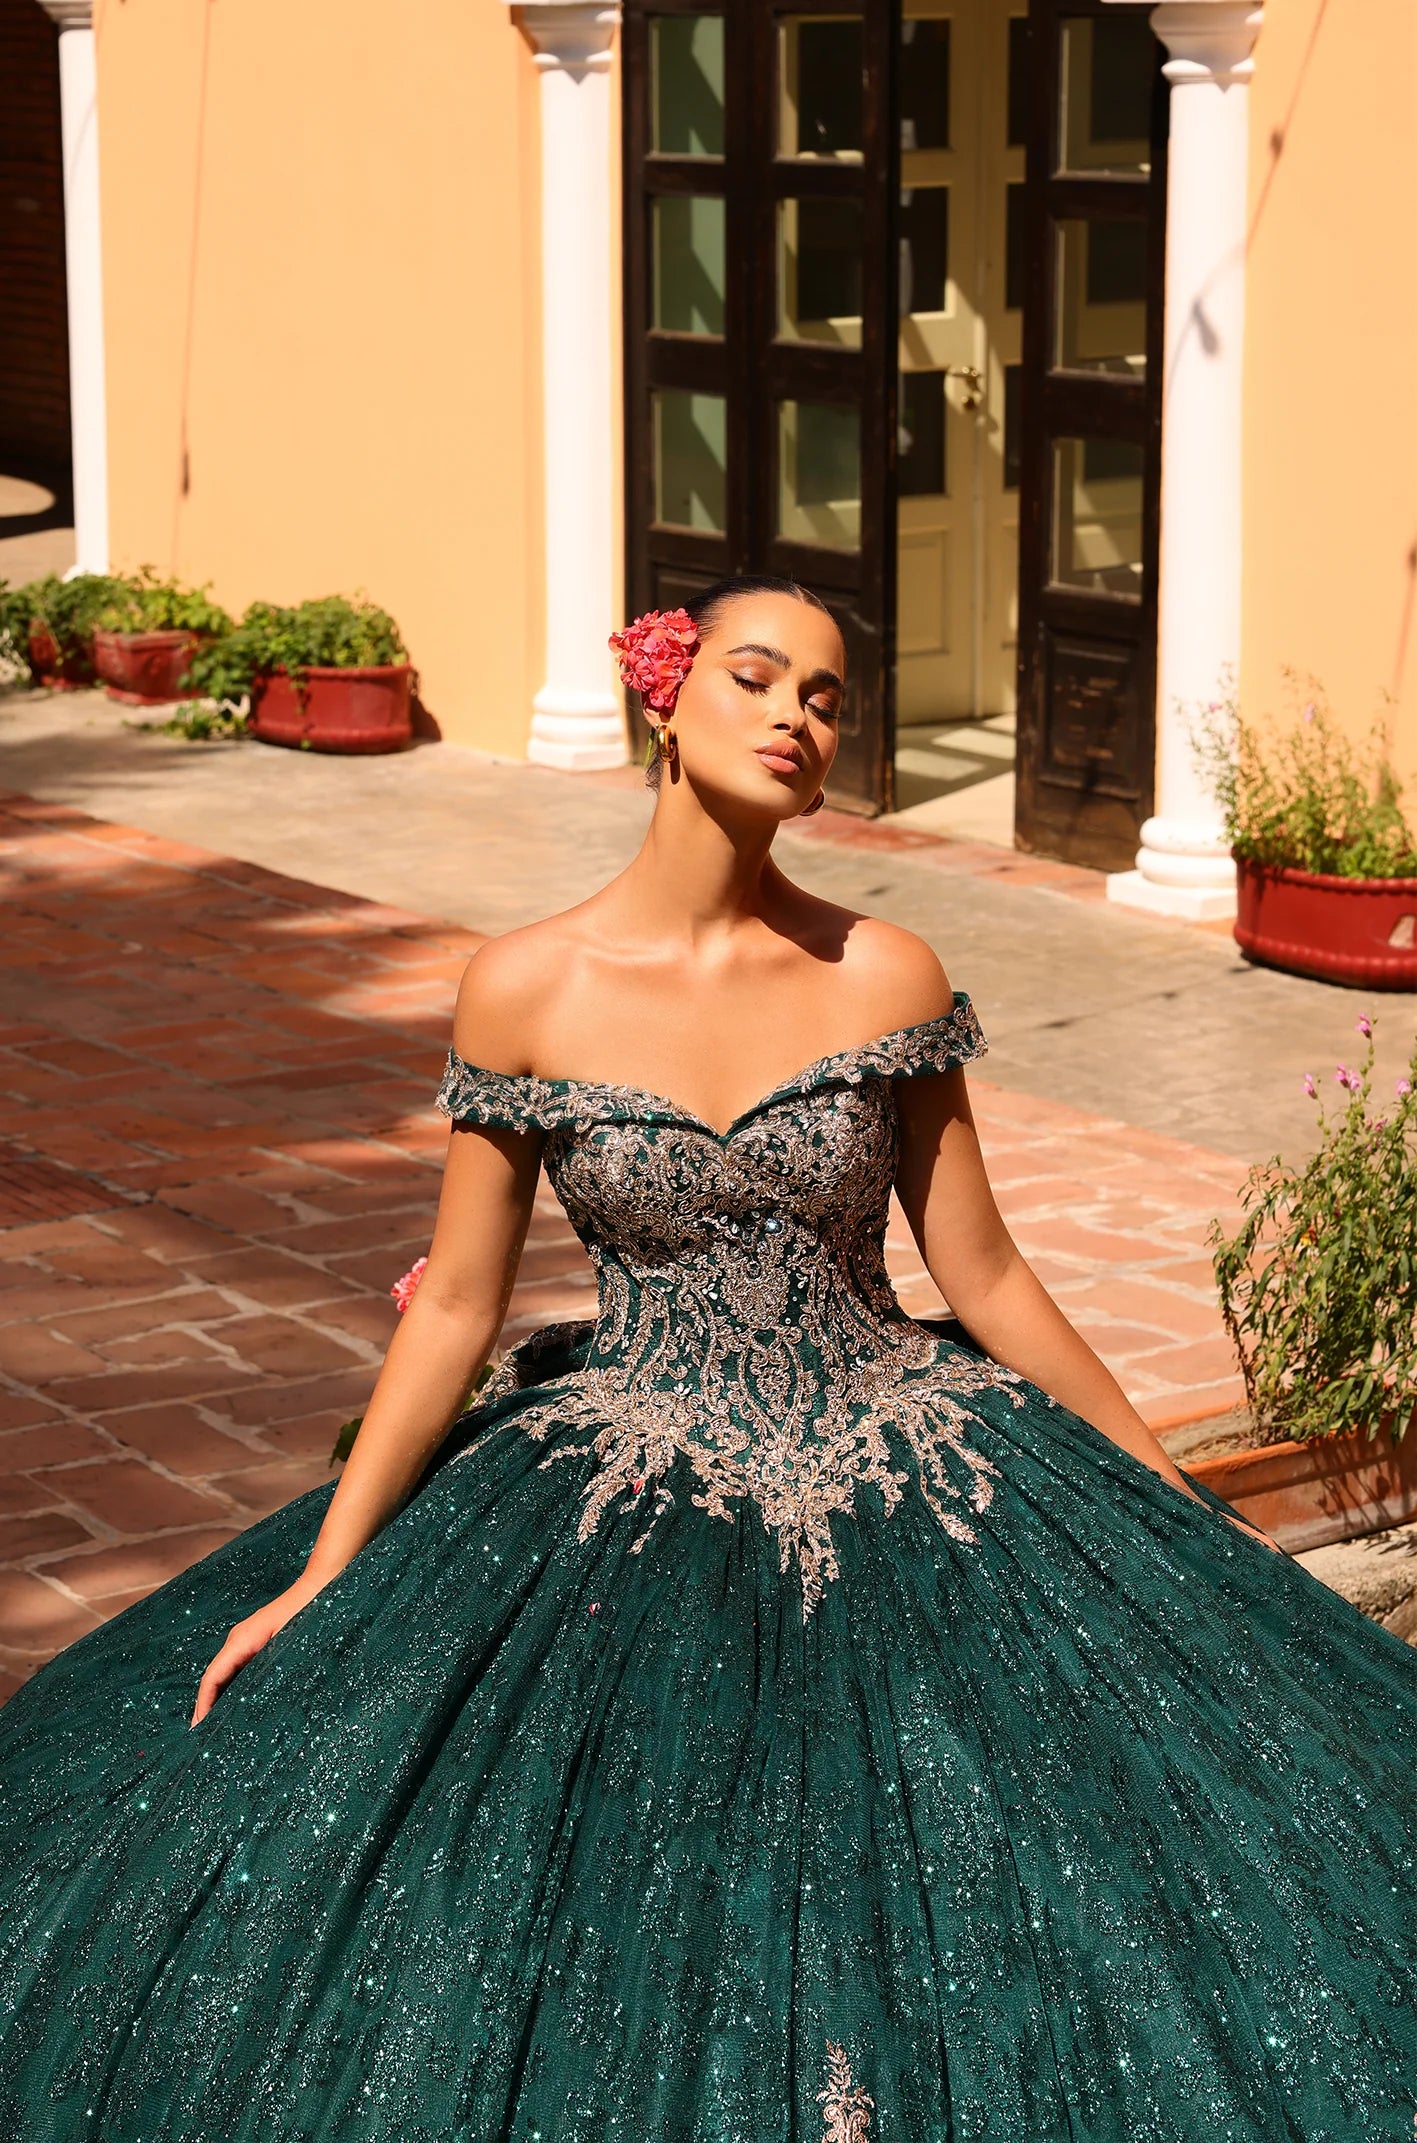 This Amarra 54324 Quinceanera Dress boasts a glittering hooded cape and off-the-shoulder corset, perfect for making a grand entrance at any party or ball. The exquisite train and bow detail add an extra touch of elegance to this stunning gown. Elevate your style with this eye-catching dress.